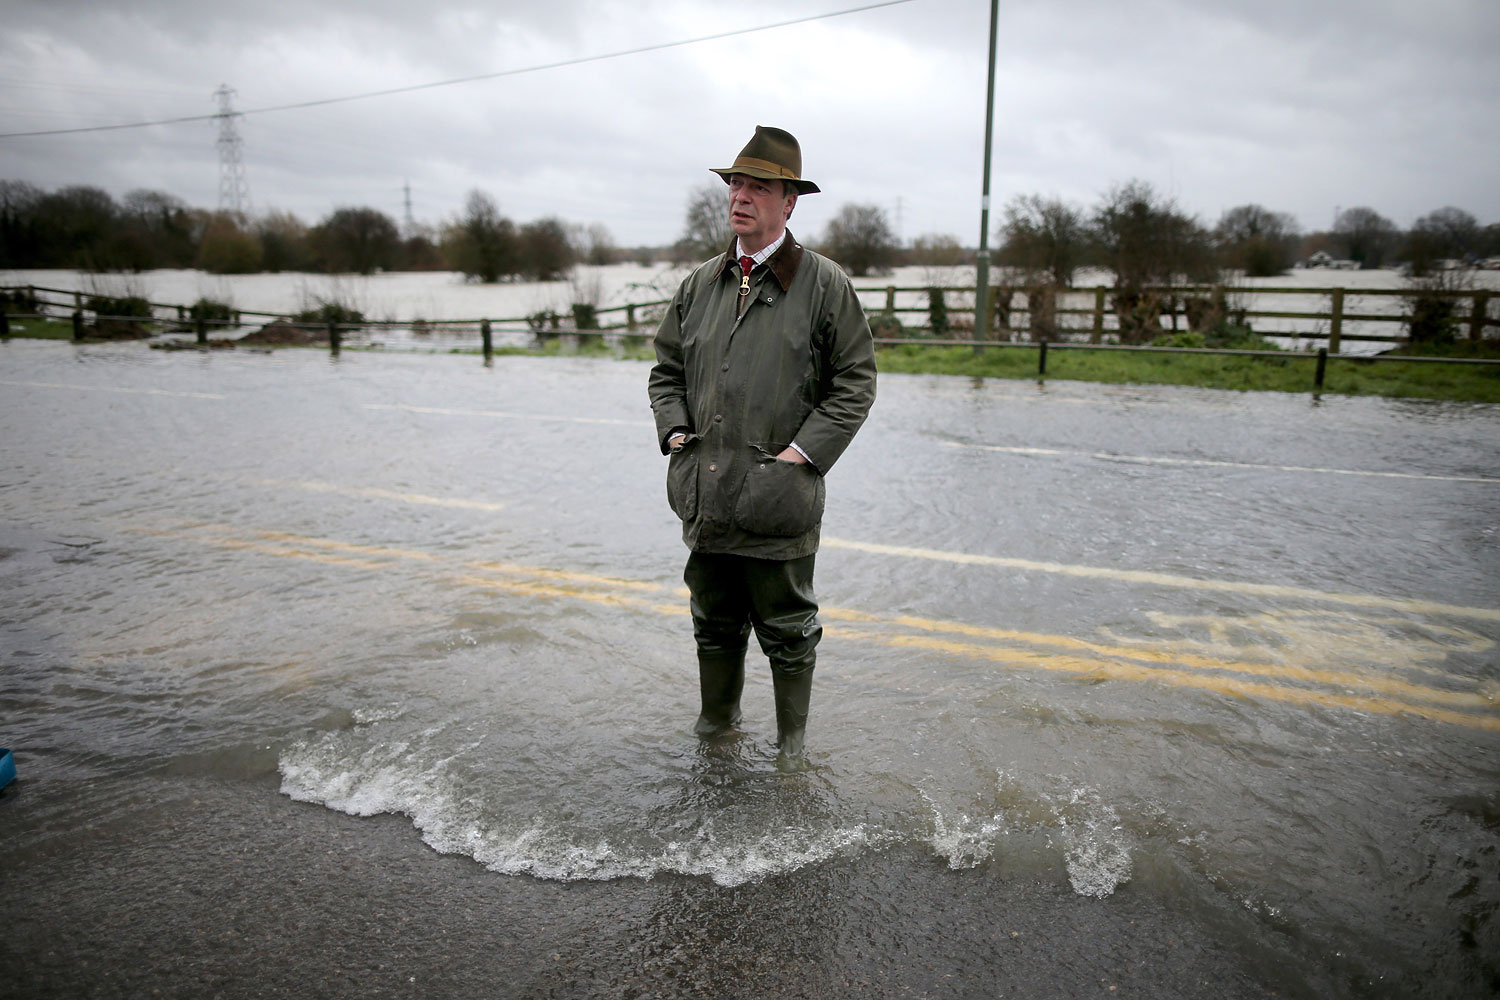 Leader of UKIP Nigel Farage tours flooded properties  and roads as he visits Chertsey on Feb. 11, 2014 in Chertsey, United Kingdom. (Christopher Furlong&mdash;Getty Images)